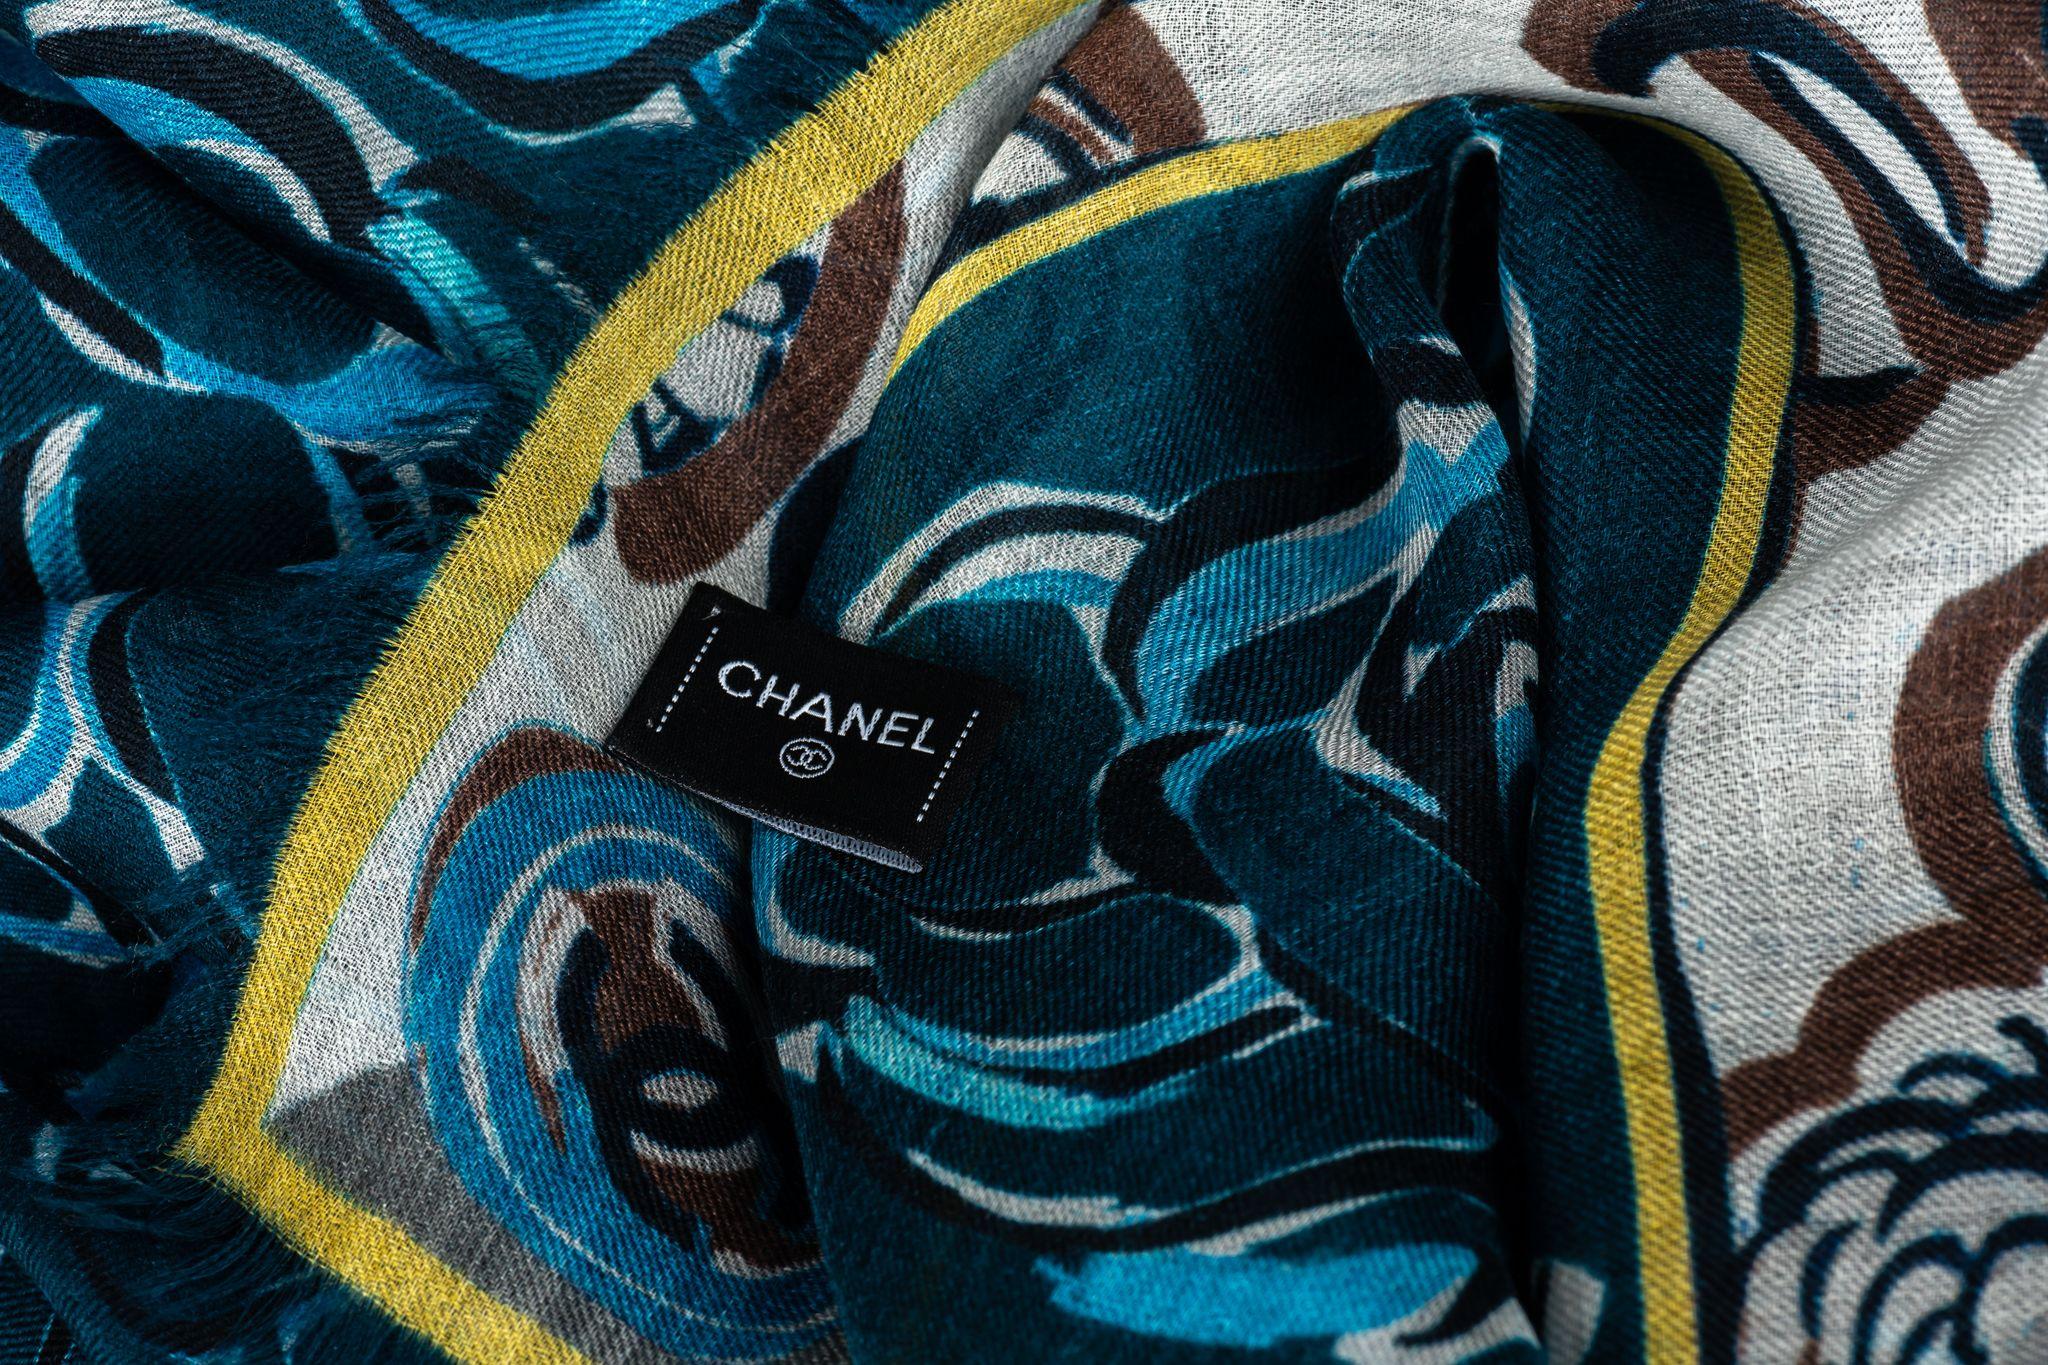 Chanel new camellia cashmere shawl in navy, green, black . Original care tag.